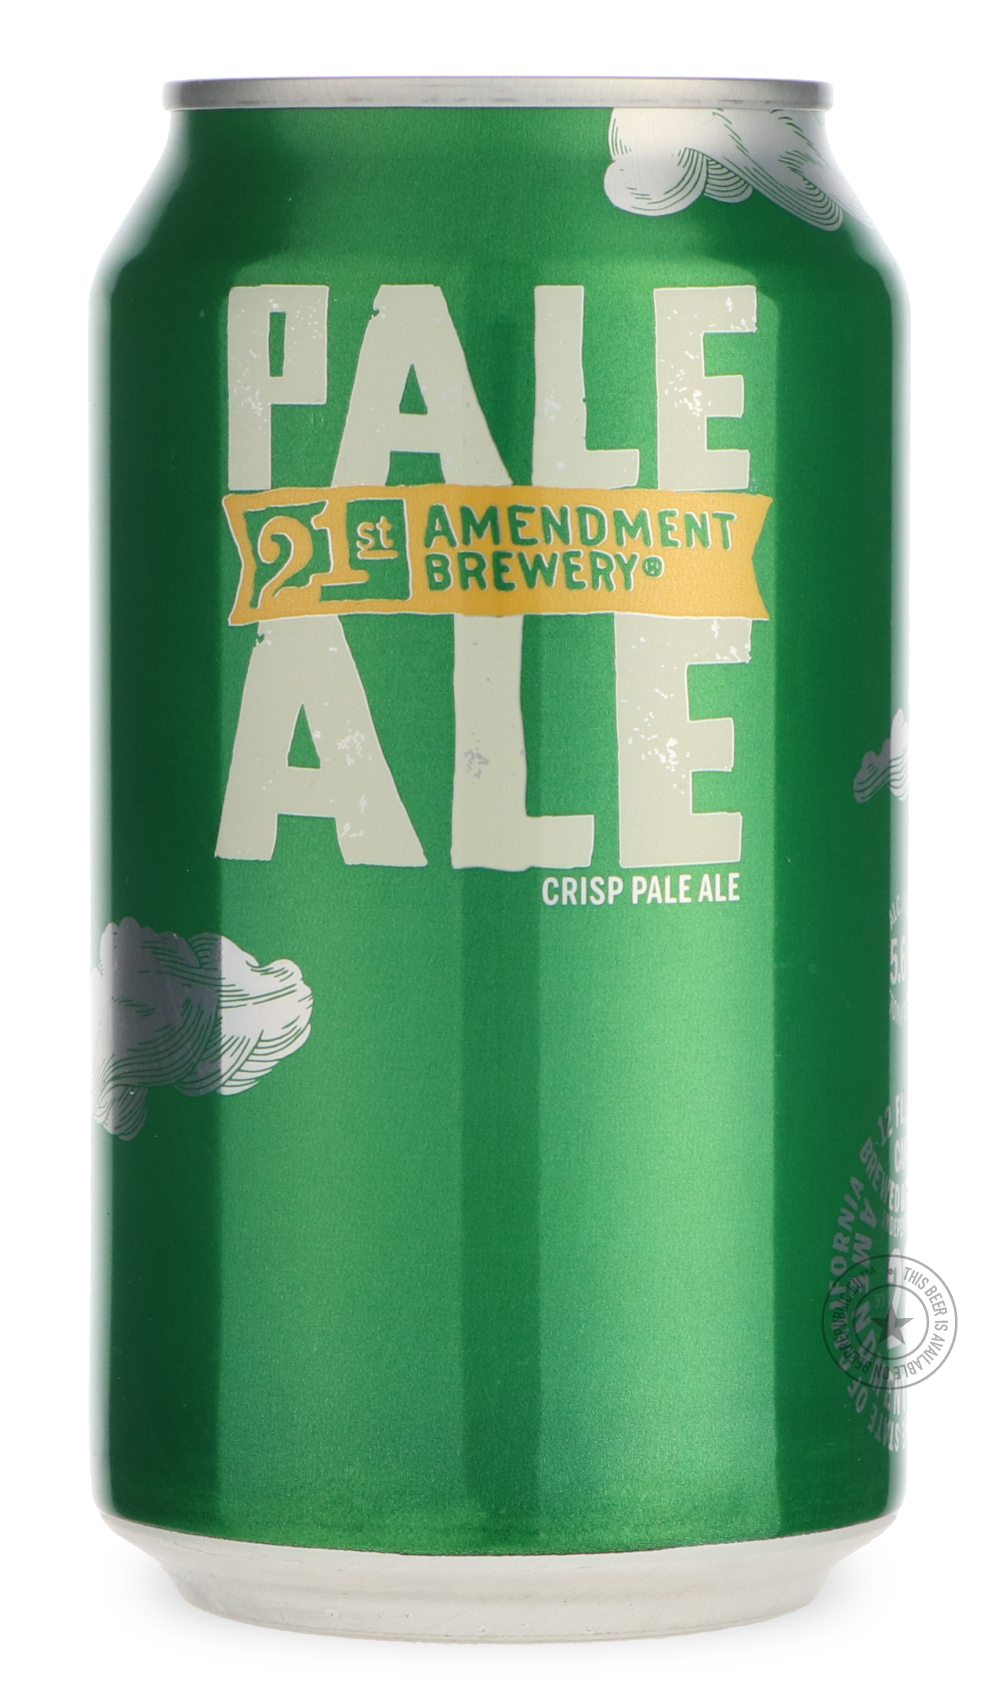 -21st Amendment- Pale Ale-Pale- Only @ Beer Republic - The best online beer store for American & Canadian craft beer - Buy beer online from the USA and Canada - Bier online kopen - Amerikaans bier kopen - Craft beer store - Craft beer kopen - Amerikanisch bier kaufen - Bier online kaufen - Acheter biere online - IPA - Stout - Porter - New England IPA - Hazy IPA - Imperial Stout - Barrel Aged - Barrel Aged Imperial Stout - Brown - Dark beer - Blond - Blonde - Pilsner - Lager - Wheat - Weizen - Amber - Barley